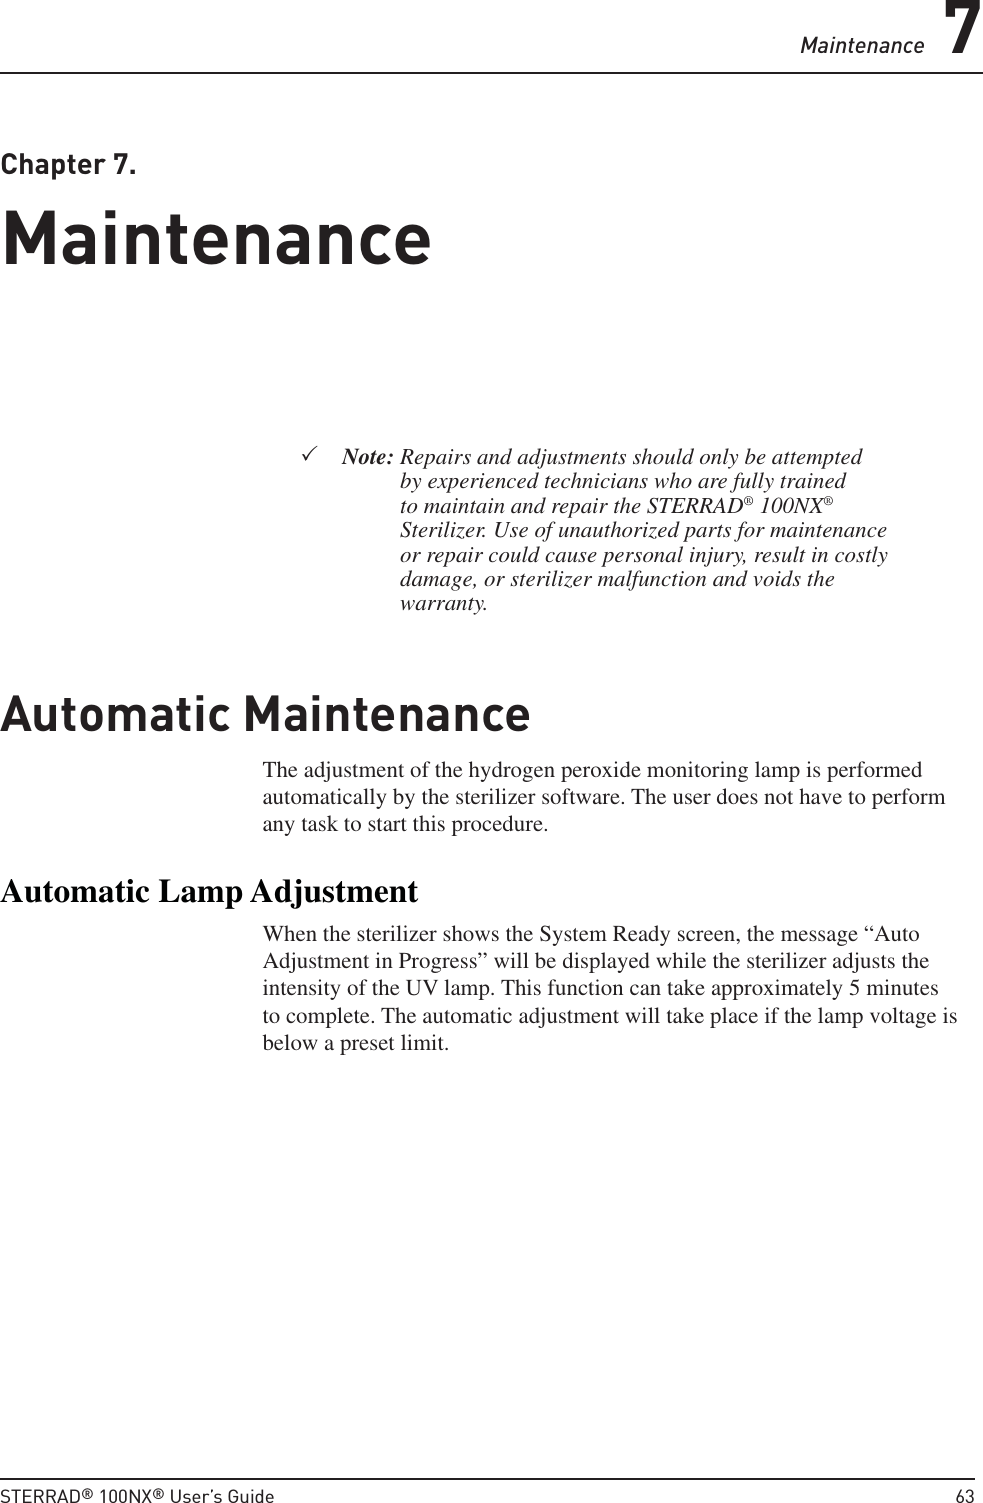 Maintenance 7STERRAD® 100NX® User’s Guide  63Chapter 7. MaintenanceMaintenanceNote:  Repairs and adjustments should only be attempted by experienced technicians who are fully trained to maintain and repair the STERRAD® 100NX® Sterilizer. Use of unauthorized parts for maintenance or repair could cause personal injury, result in costly damage, or sterilizer malfunction and voids the warranty.Automatic Maintenance The adjustment of the hydrogen peroxide monitoring lamp is performed automatically by the sterilizer software. The user does not have to perform any task to start this procedure. Automatic Lamp AdjustmentWhen the sterilizer shows the System Ready screen, the message “Auto Adjustment in Progress” will be displayed while the sterilizer adjusts the intensity of the UV lamp. This function can take approximately 5 minutes to complete. The automatic adjustment will take place if the lamp voltage is below a preset limit.